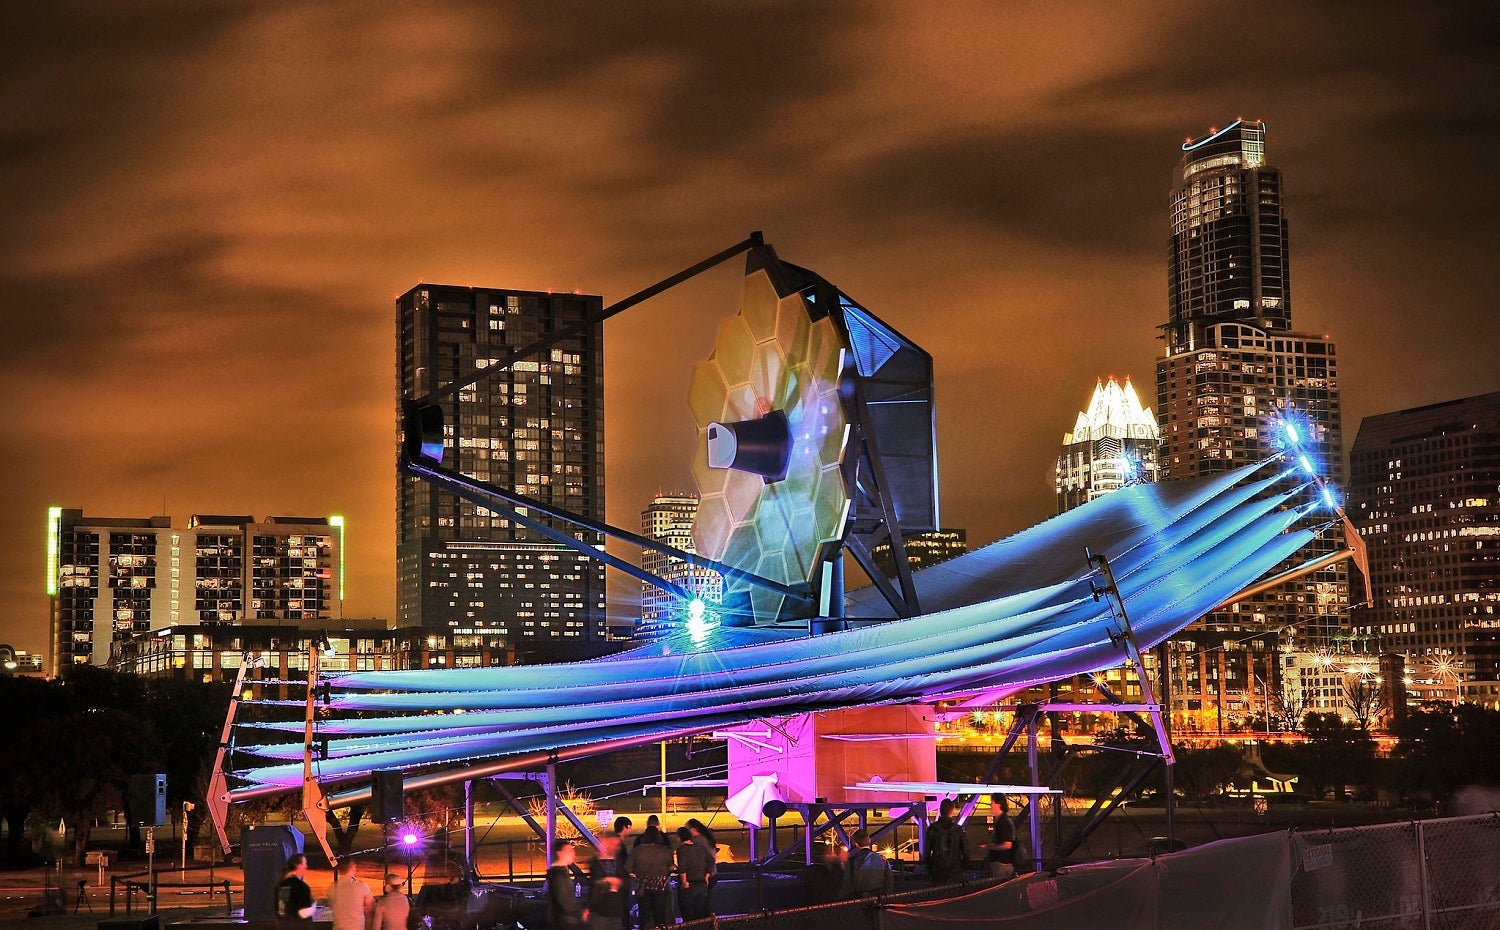 A full-scale model of the James Webb Space Telescope debuted for the first time in 2013 at the South by Southwest festival in Austin, Texas.